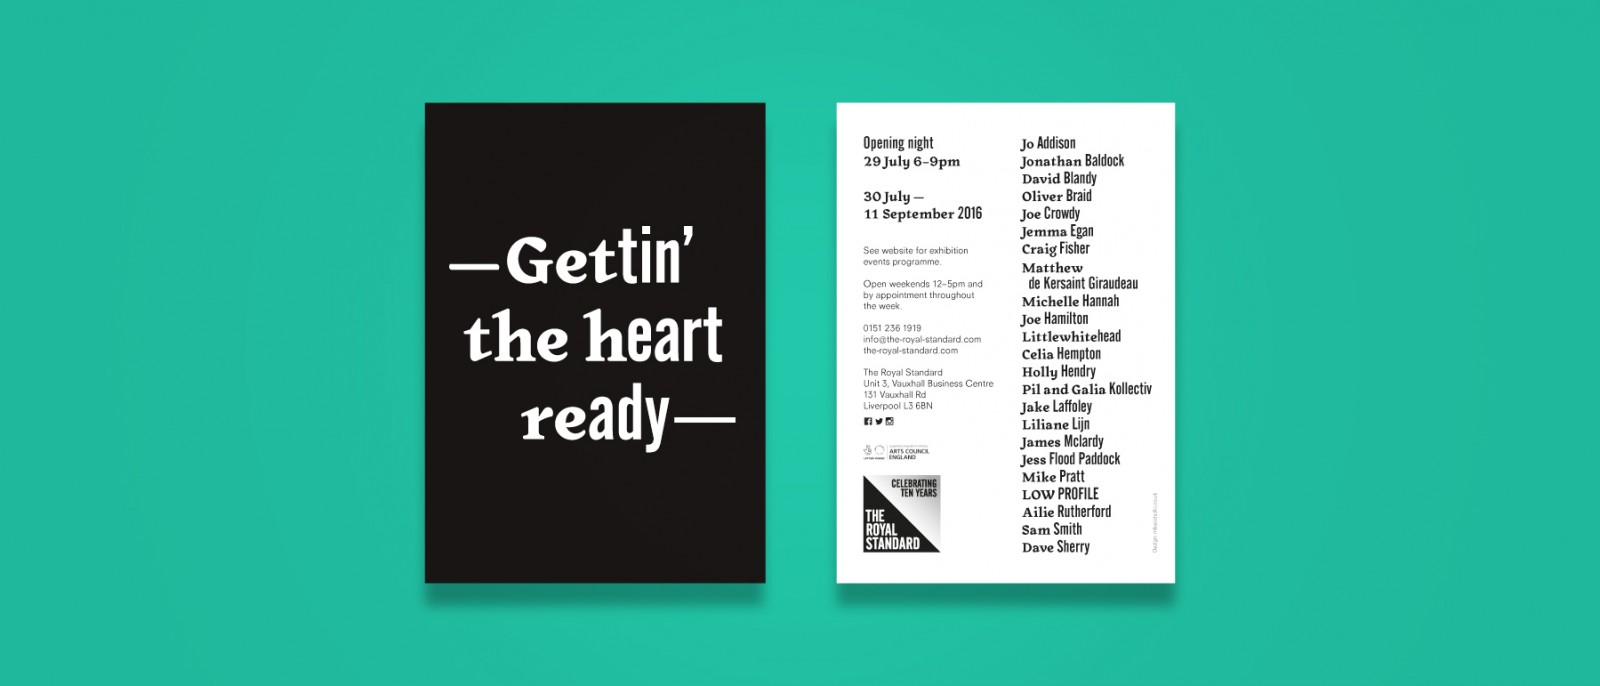 Gettin’ the heart ready exhibition graphics